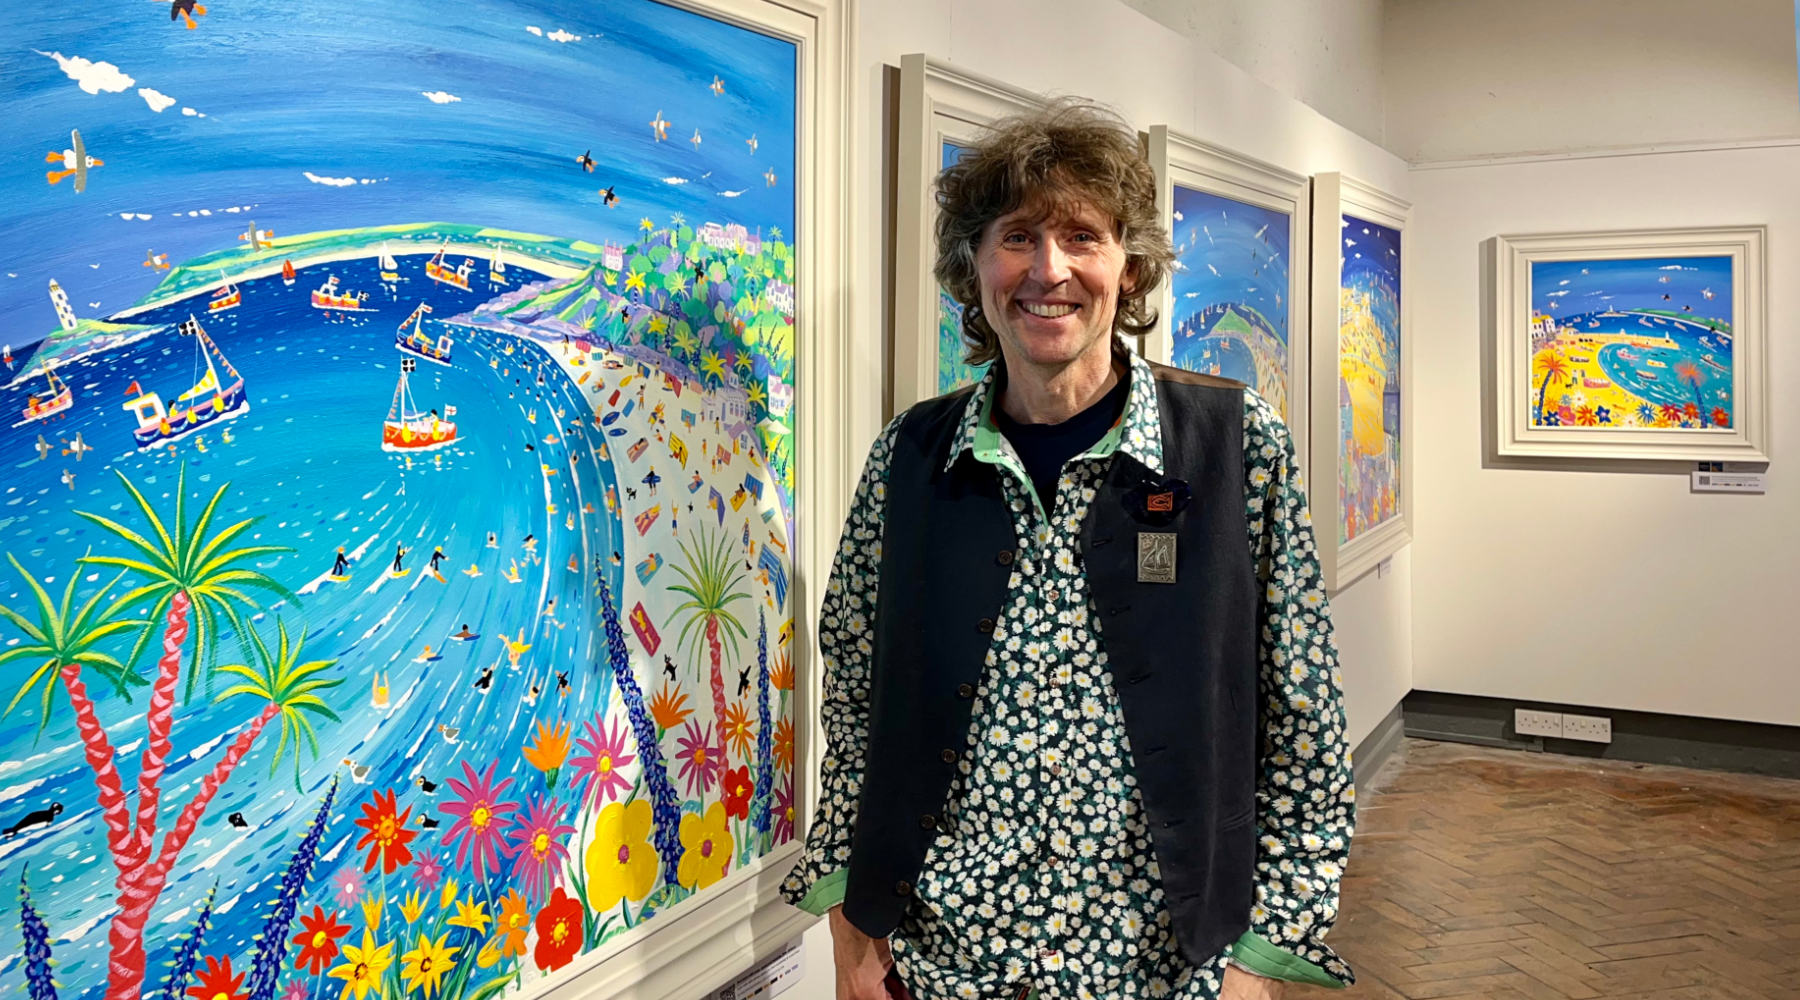 Cornwall artist John Dyer pictured with his painting of the seaside exhibited at the St Ives Society of Artists Crypt Gallery in St Ives in Cornwall.